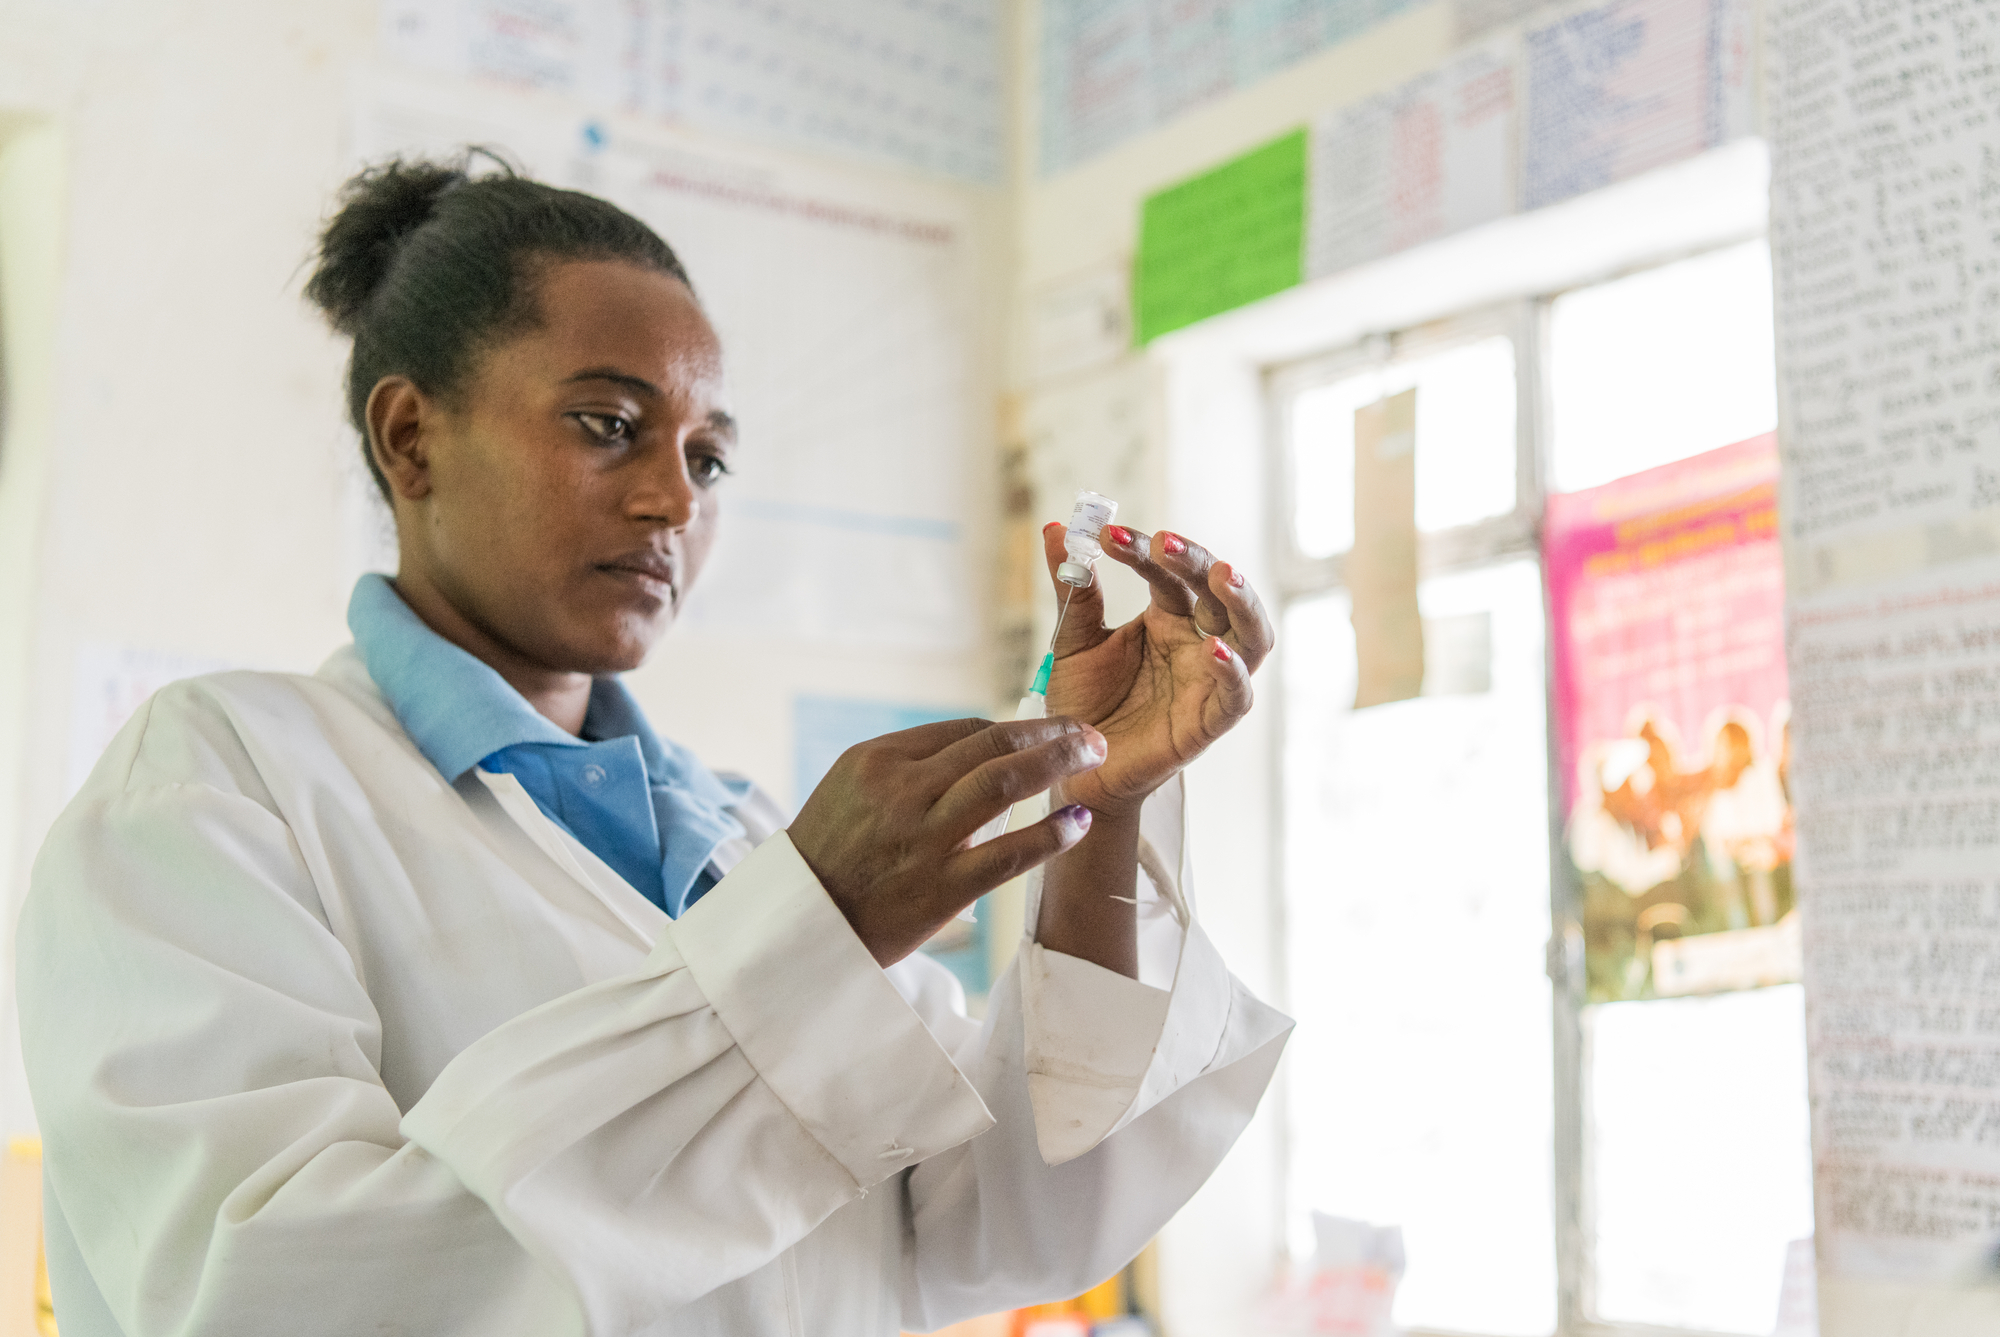 Beimnet Endashaw, (25), a health extension worker, prepares a contraceptive injection at the Shera Dibandiba health post center near Mojo town, Ethiopia on September 2, 2019.